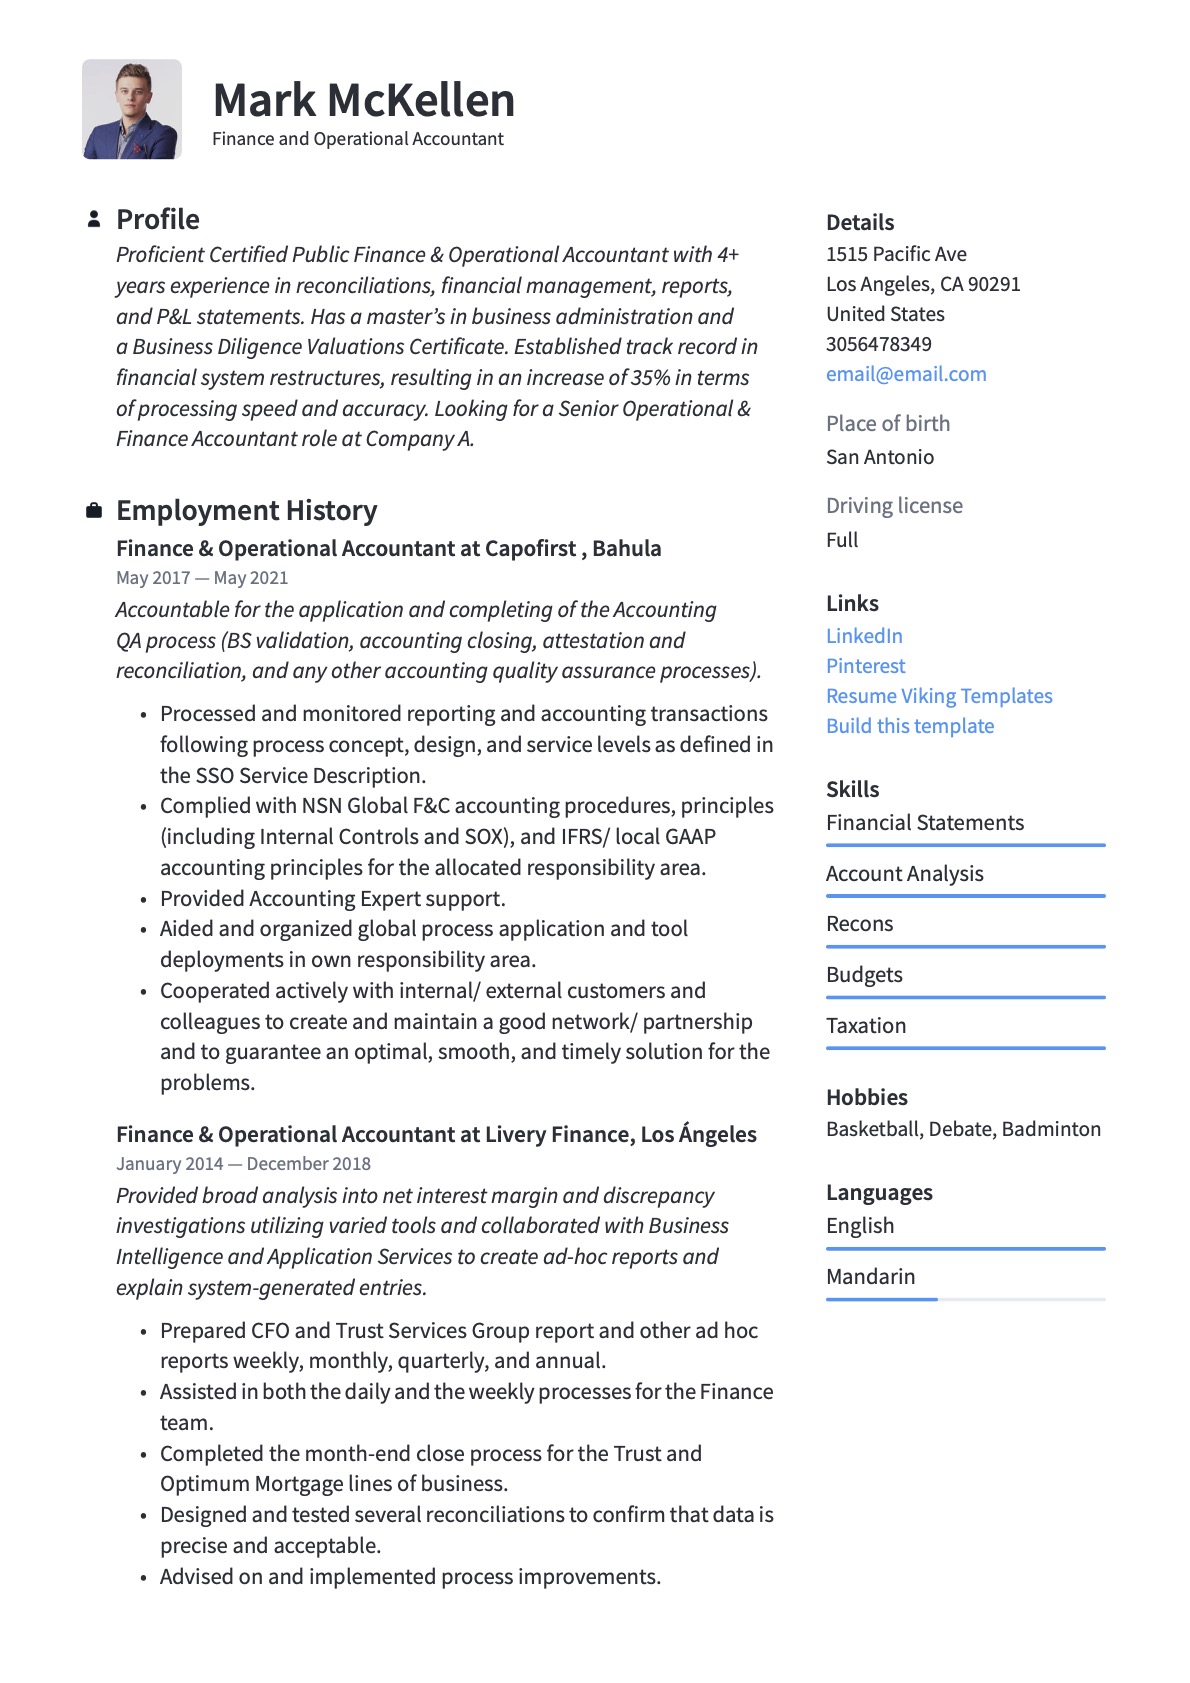 Professional Finance & Operational Accountant Resume Template